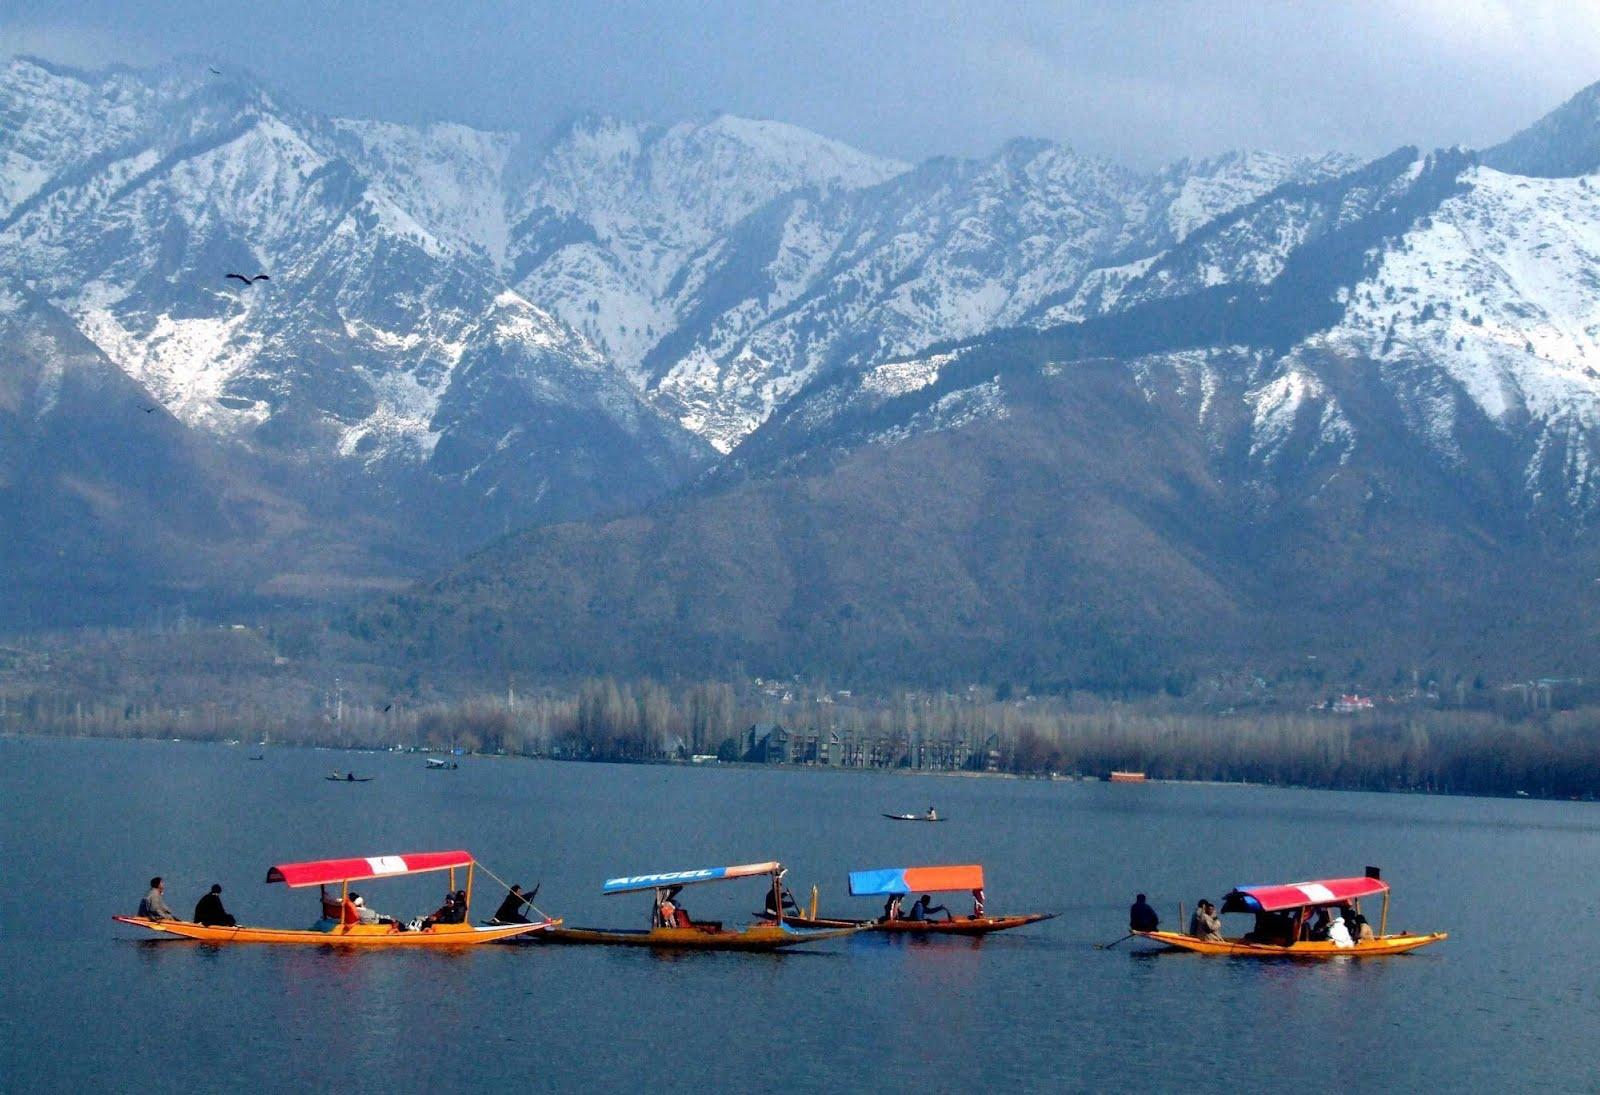 Kashmir Trip and Golden Triangle Tour. India By Locals